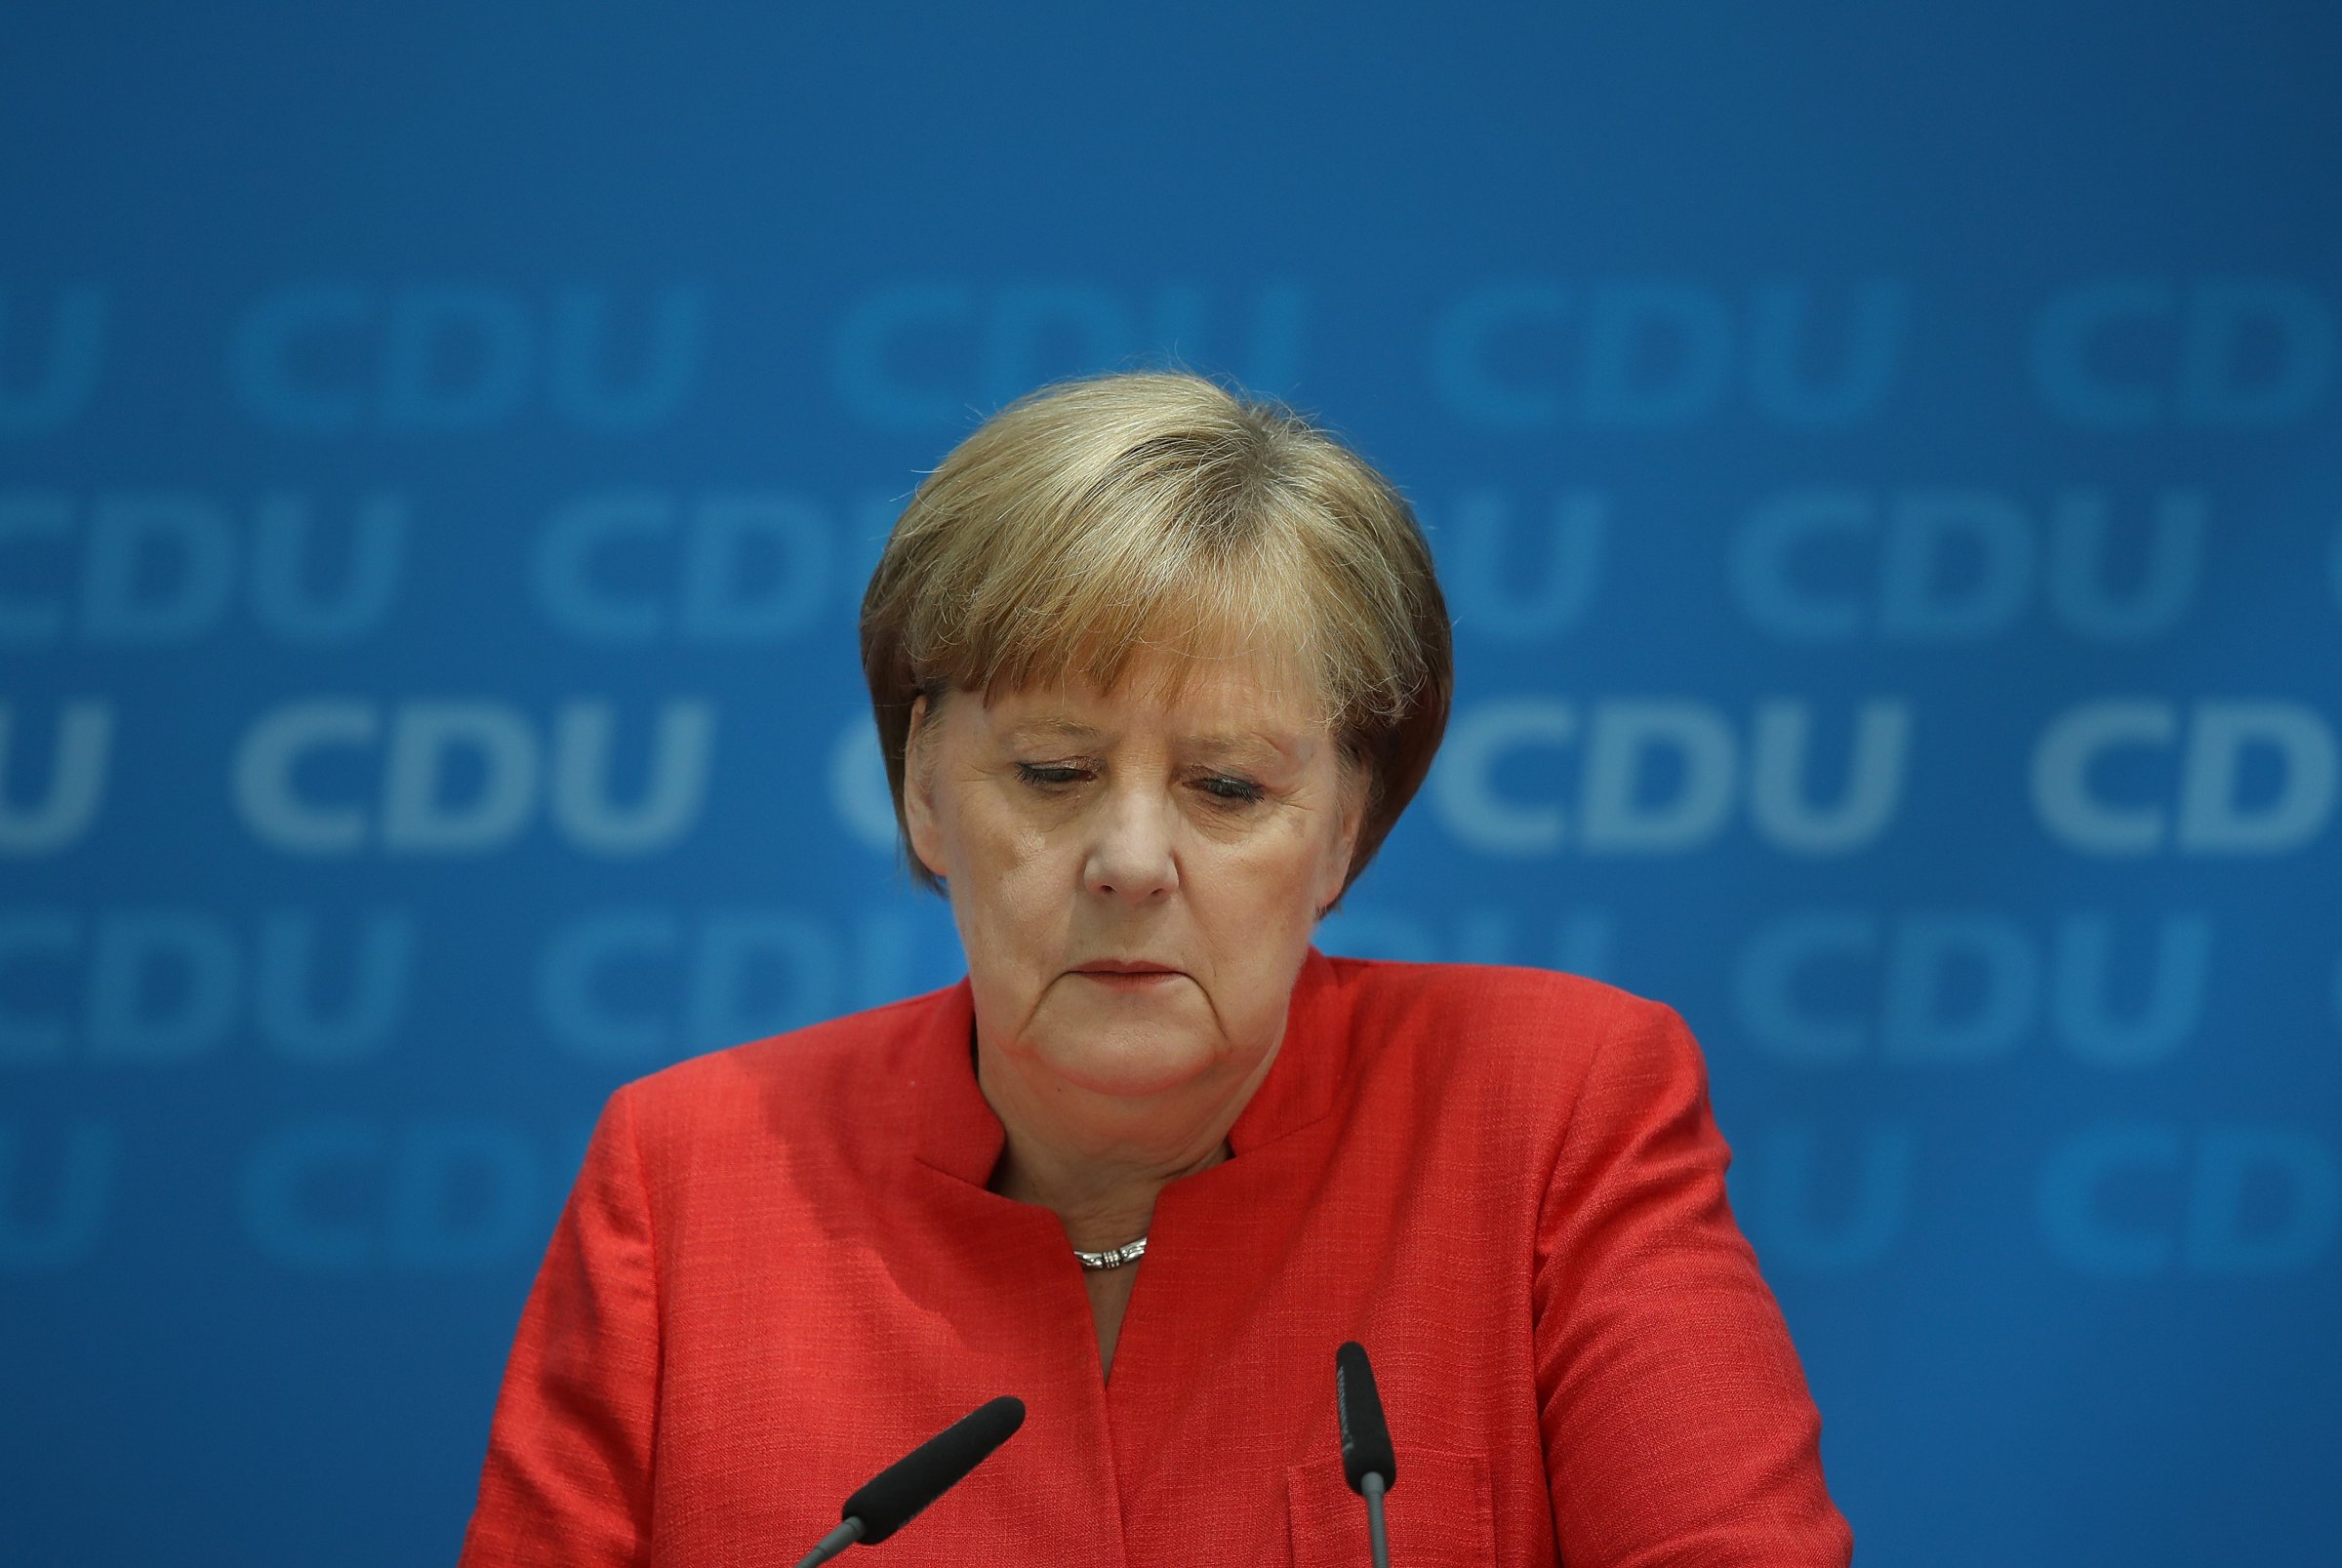 Merkel Holds Press Conference Over Migrants Policy Disagreement